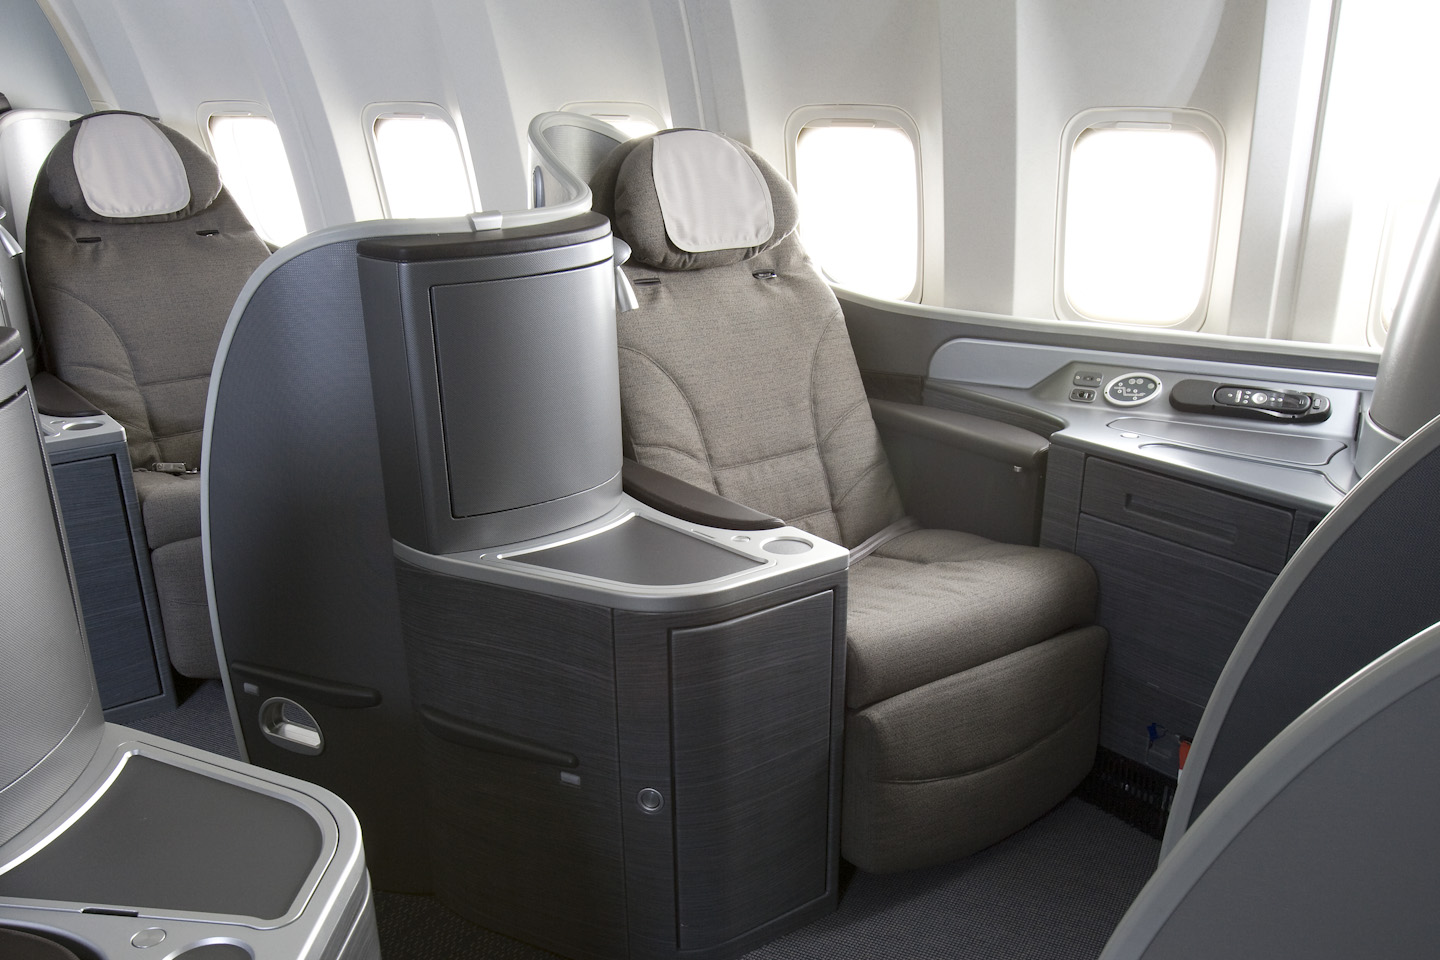 What is the difference between United Airlines first-class and economy seating?